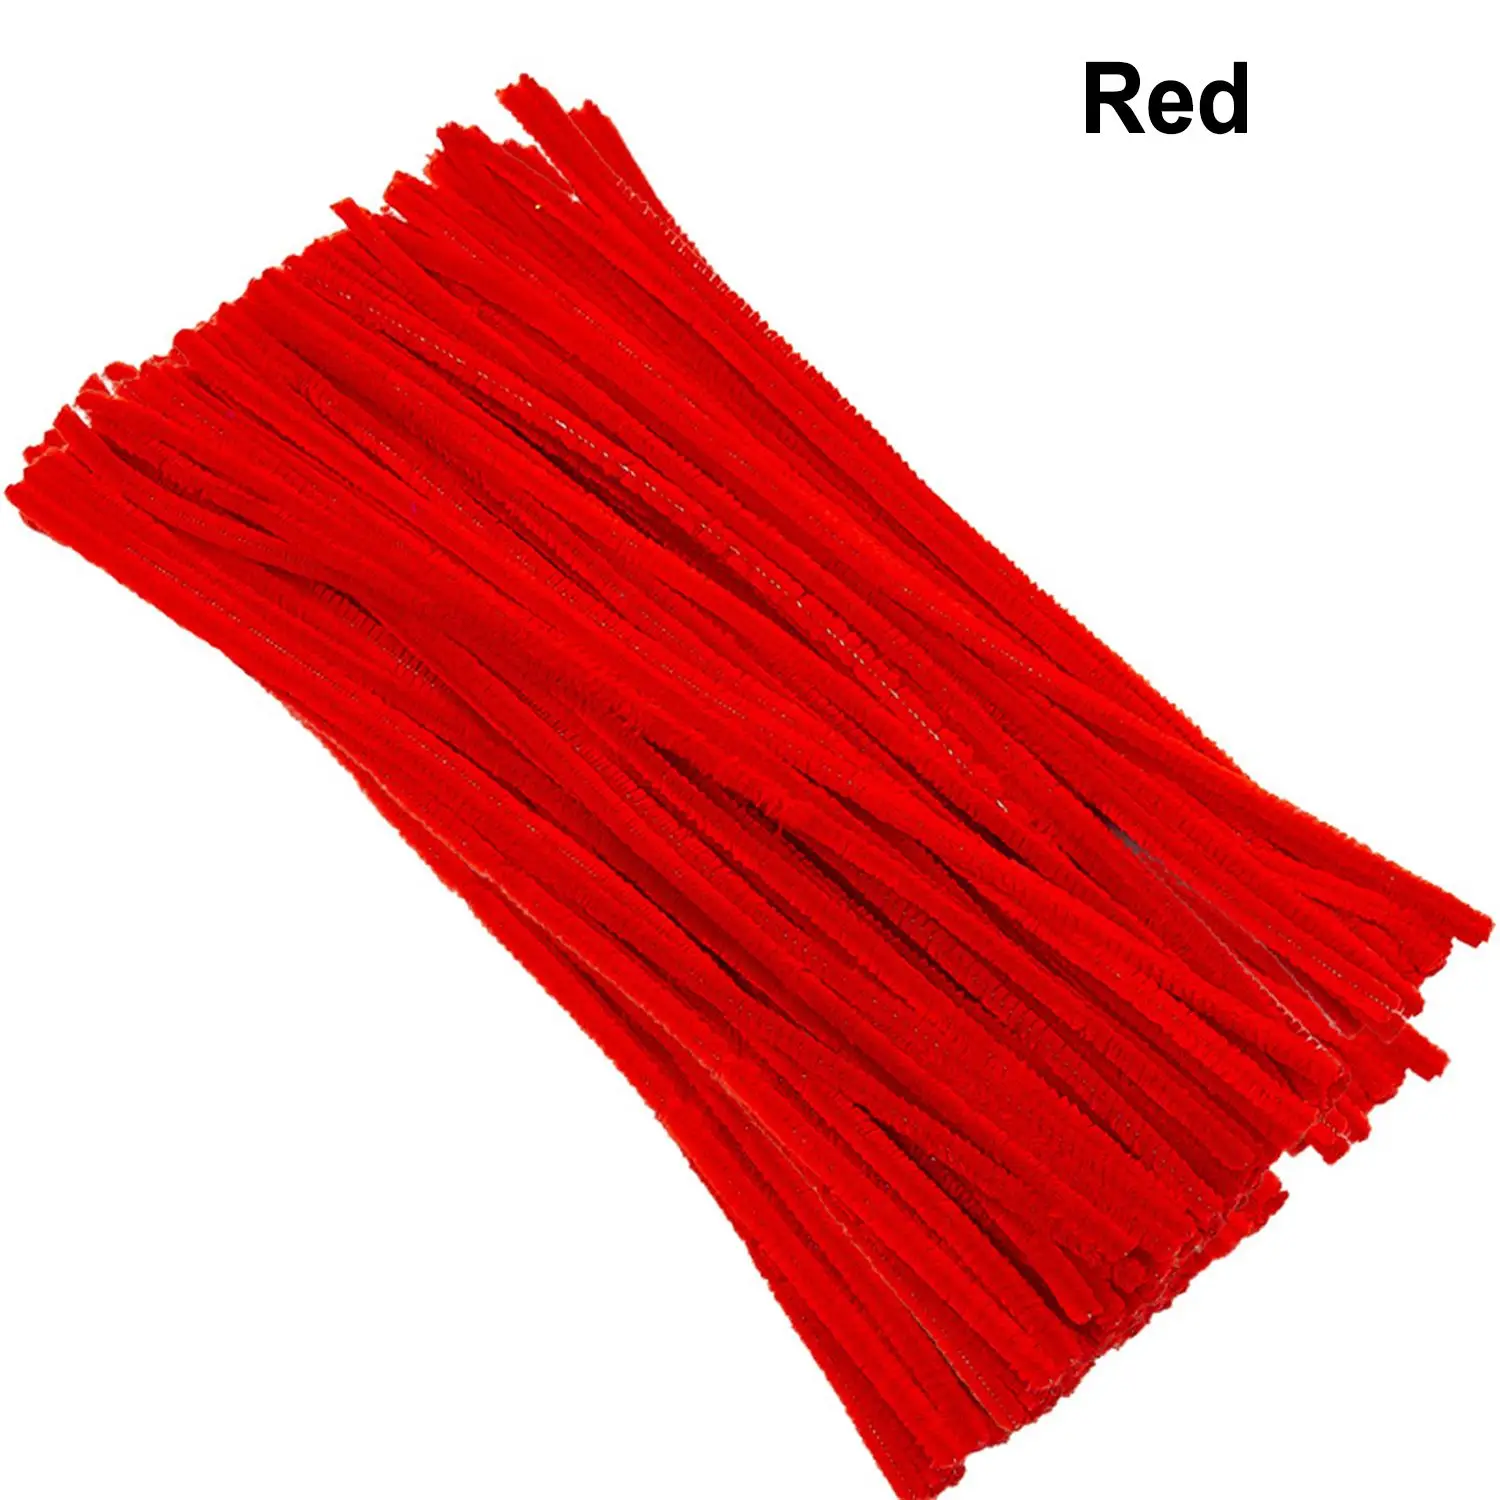 Enenes Craft Pipe Cleaners 300 Pcs Red Chenille Stem 6mm x 12 inch Twistable Stems Children’s Bendable Sculpting Sticks for Crafts and Arts (300, Red)